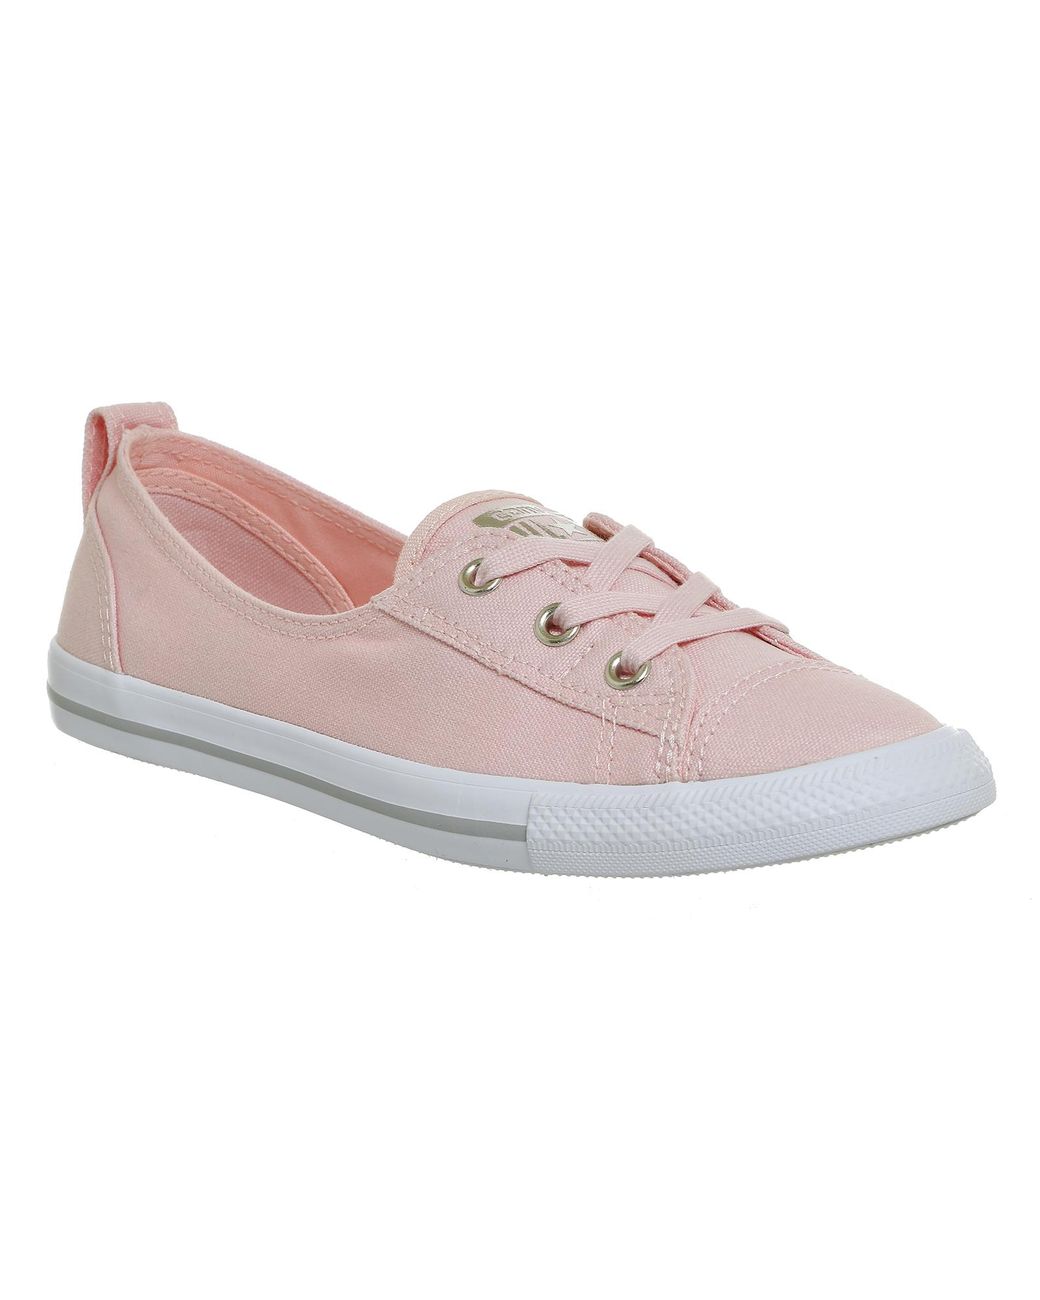 Converse Ctas Ballet Lace Trainers in Pink | Lyst Australia